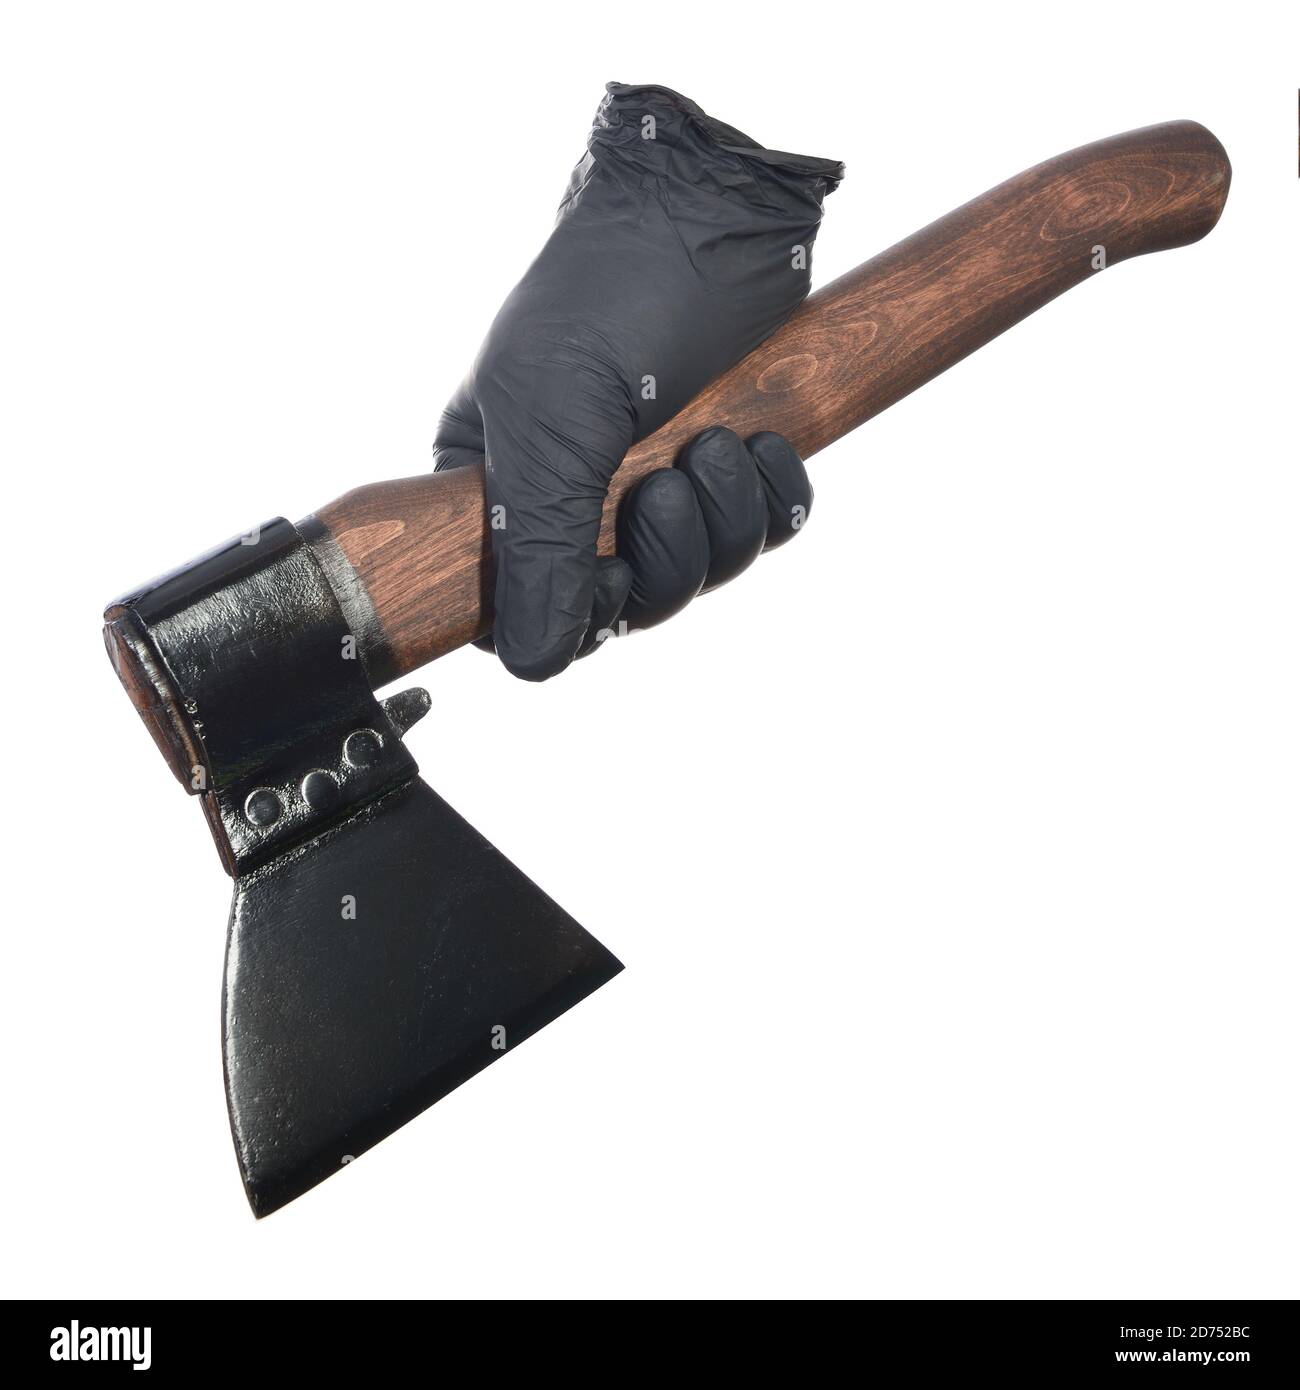 https://c8.alamy.com/comp/2D752BC/an-arm-with-black-latex-gloves-holding-a-small-axe-2D752BC.jpg